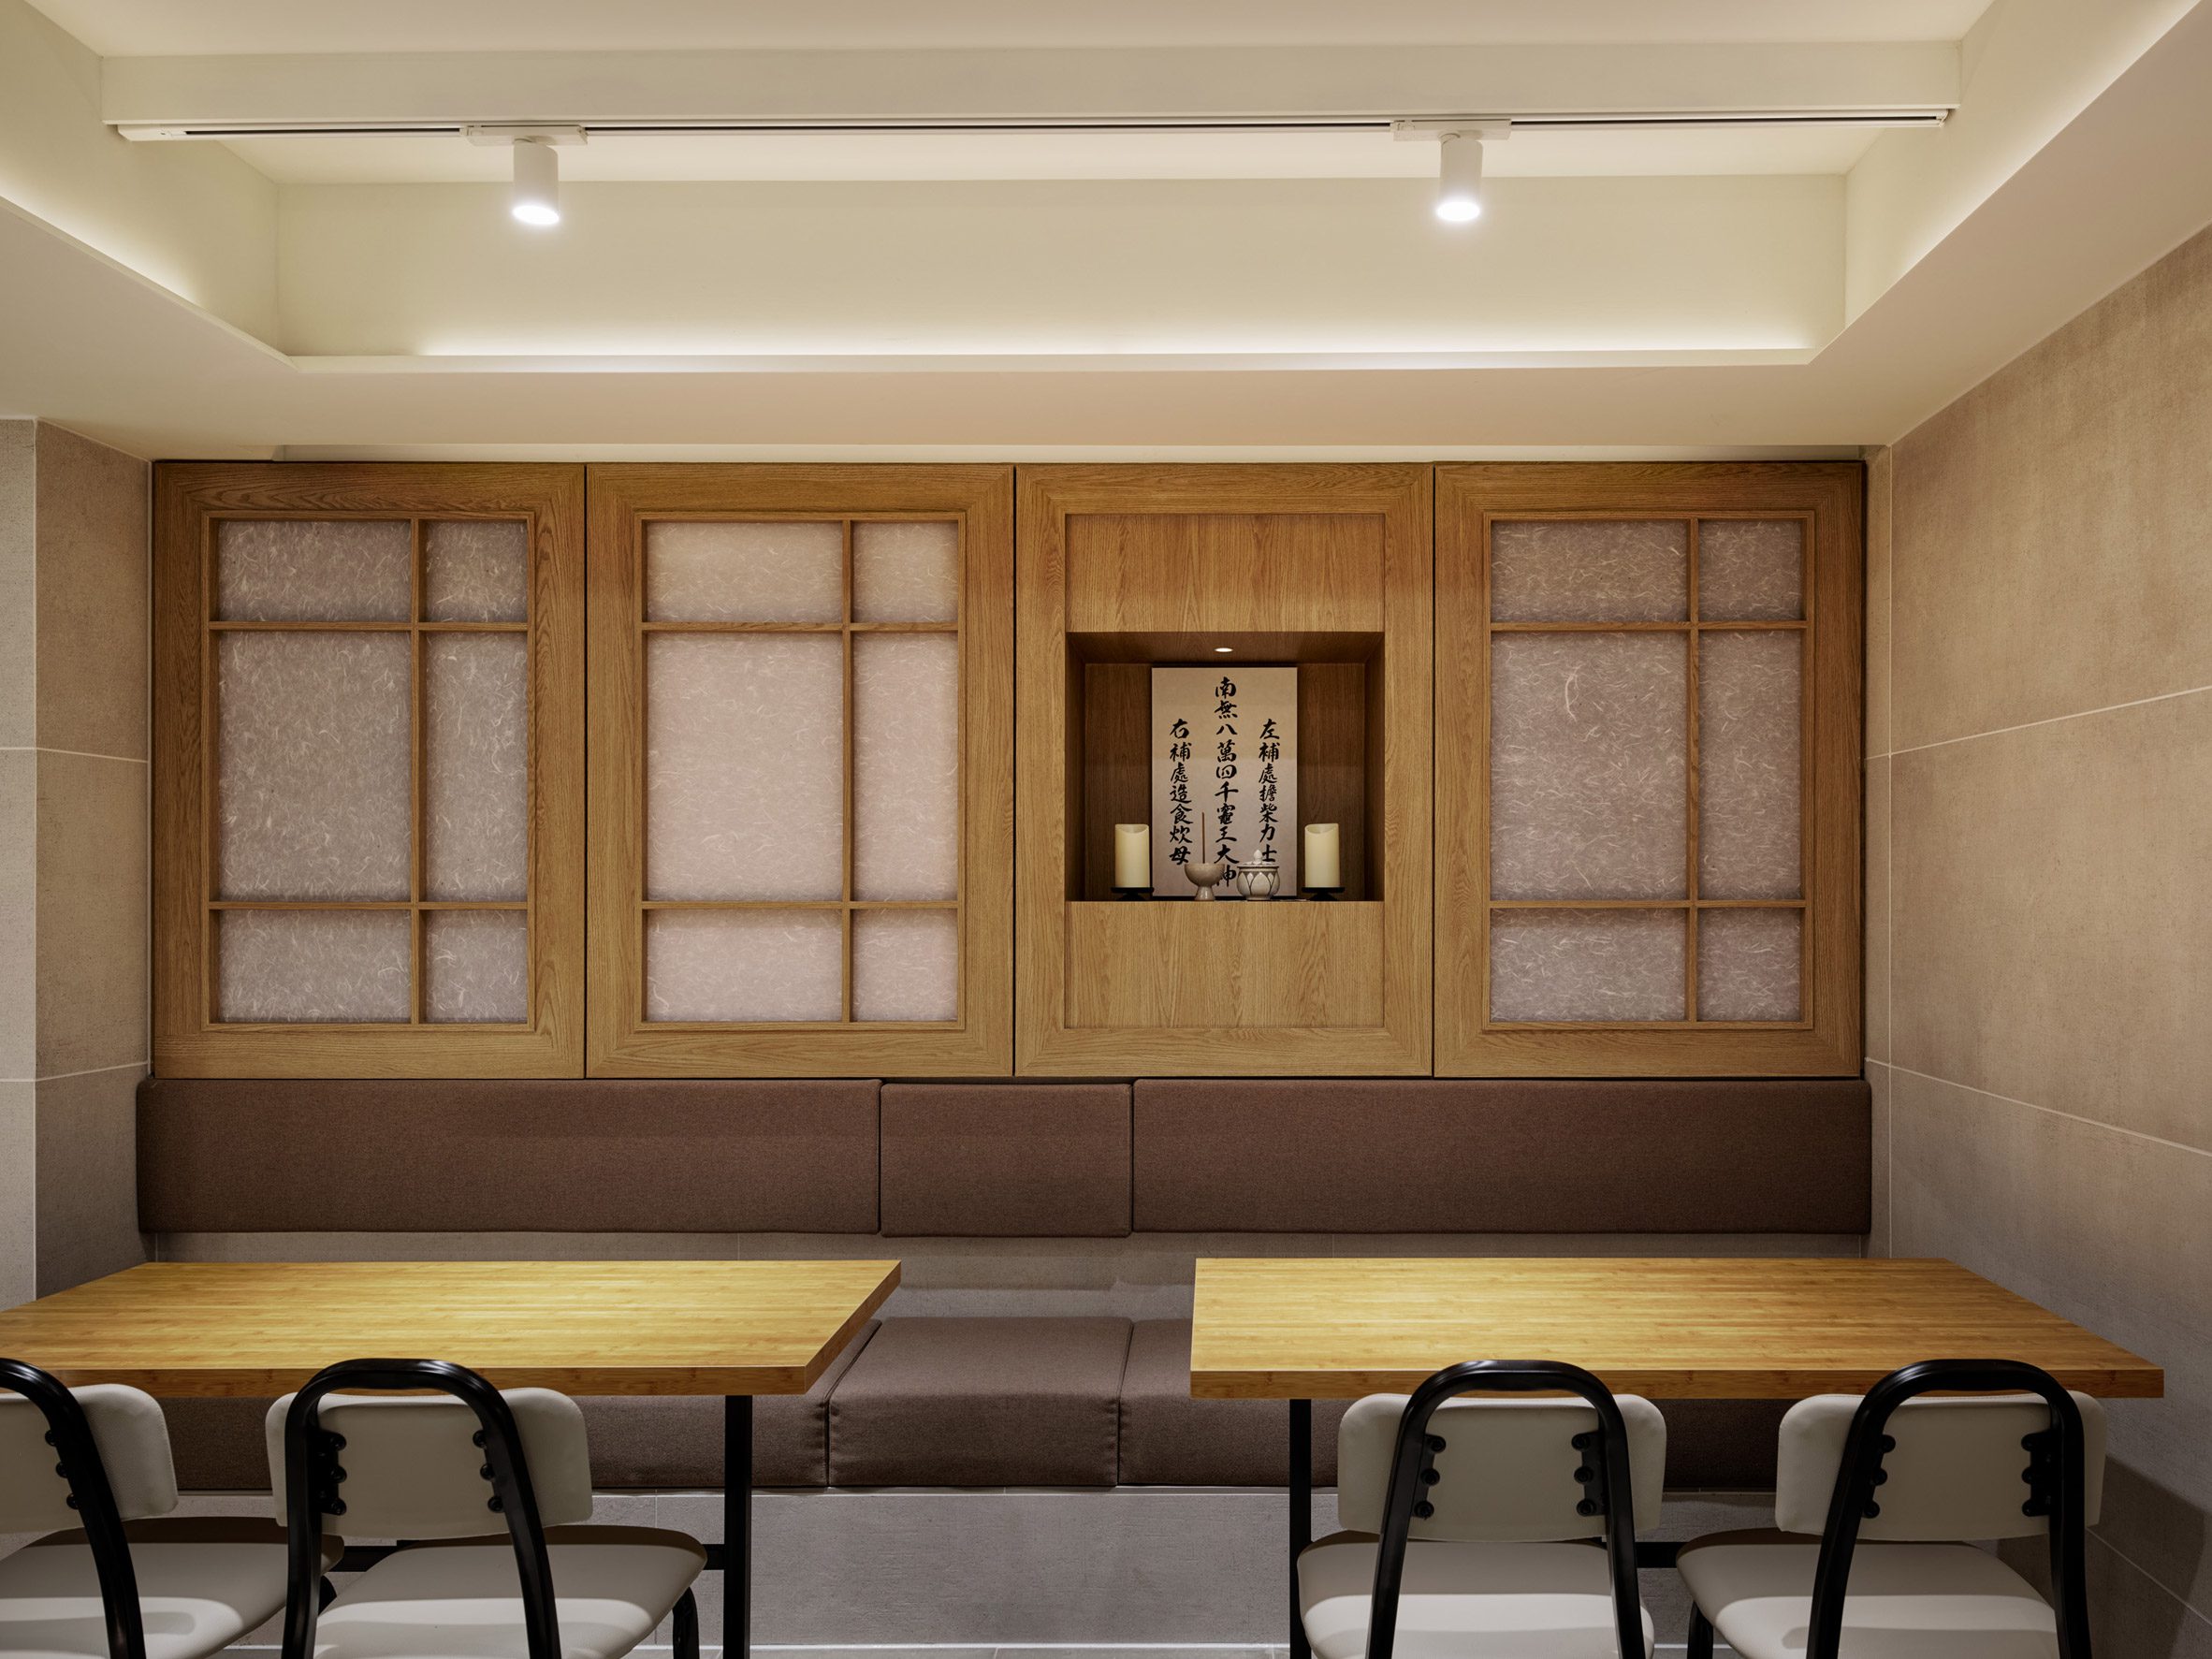 Dining area of Buddhist temple by Design by 83